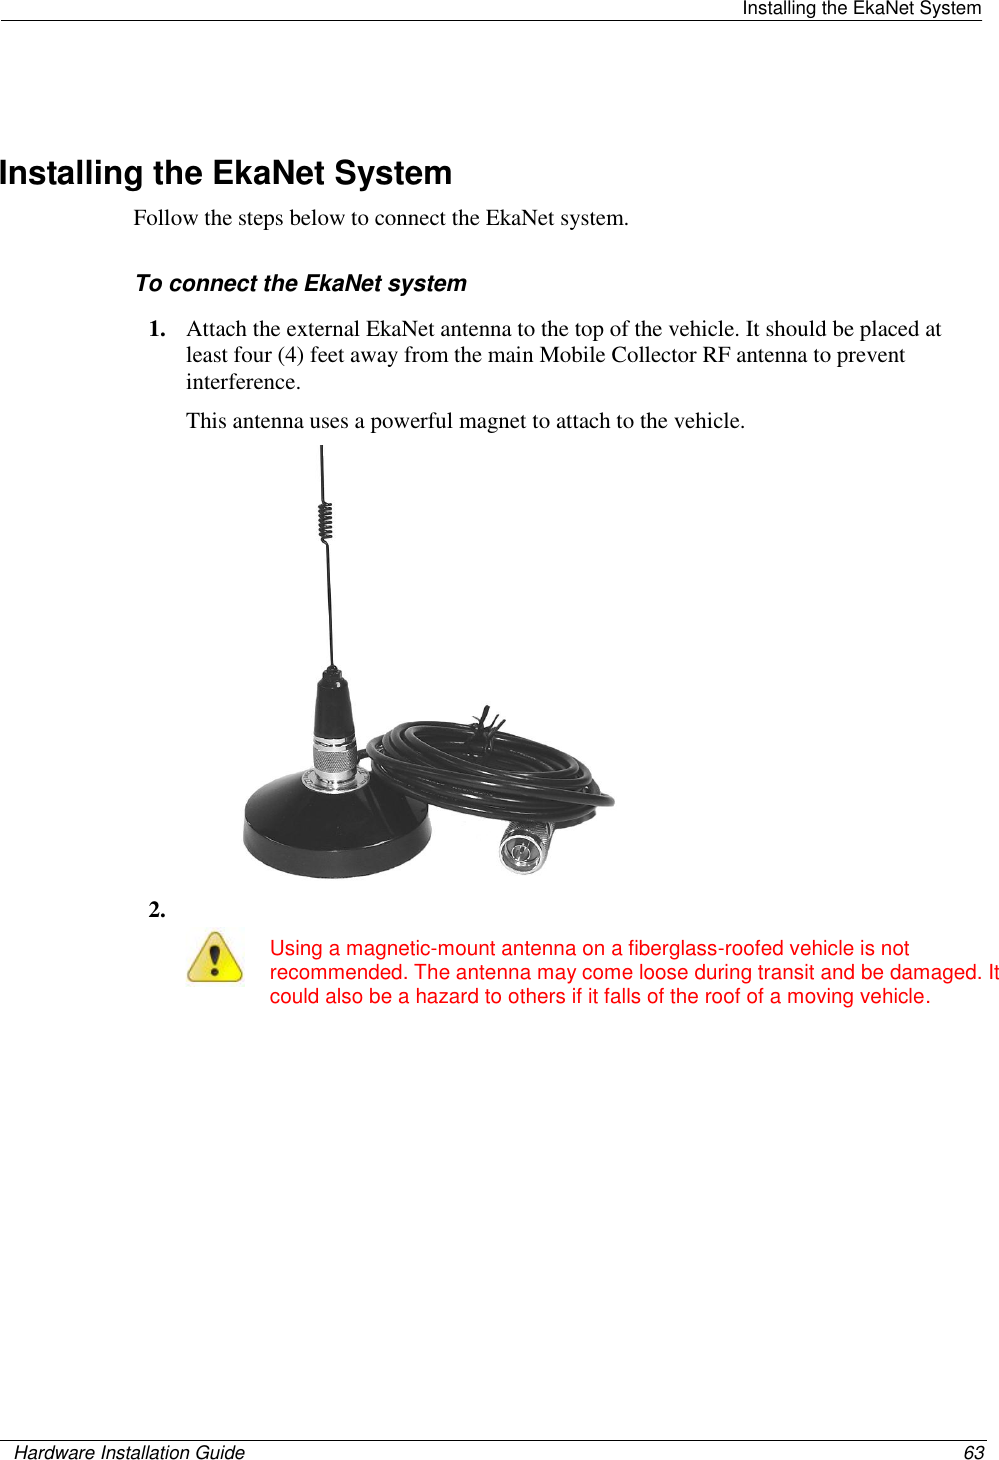   Installing the EkaNet System    Hardware Installation Guide  63    Installing the EkaNet System Follow the steps below to connect the EkaNet system.   To connect the EkaNet system 1. Attach the external EkaNet antenna to the top of the vehicle. It should be placed at least four (4) feet away from the main Mobile Collector RF antenna to prevent interference.  This antenna uses a powerful magnet to attach to the vehicle.  2.   Using a magnetic-mount antenna on a fiberglass-roofed vehicle is not recommended. The antenna may come loose during transit and be damaged. It could also be a hazard to others if it falls of the roof of a moving vehicle.  